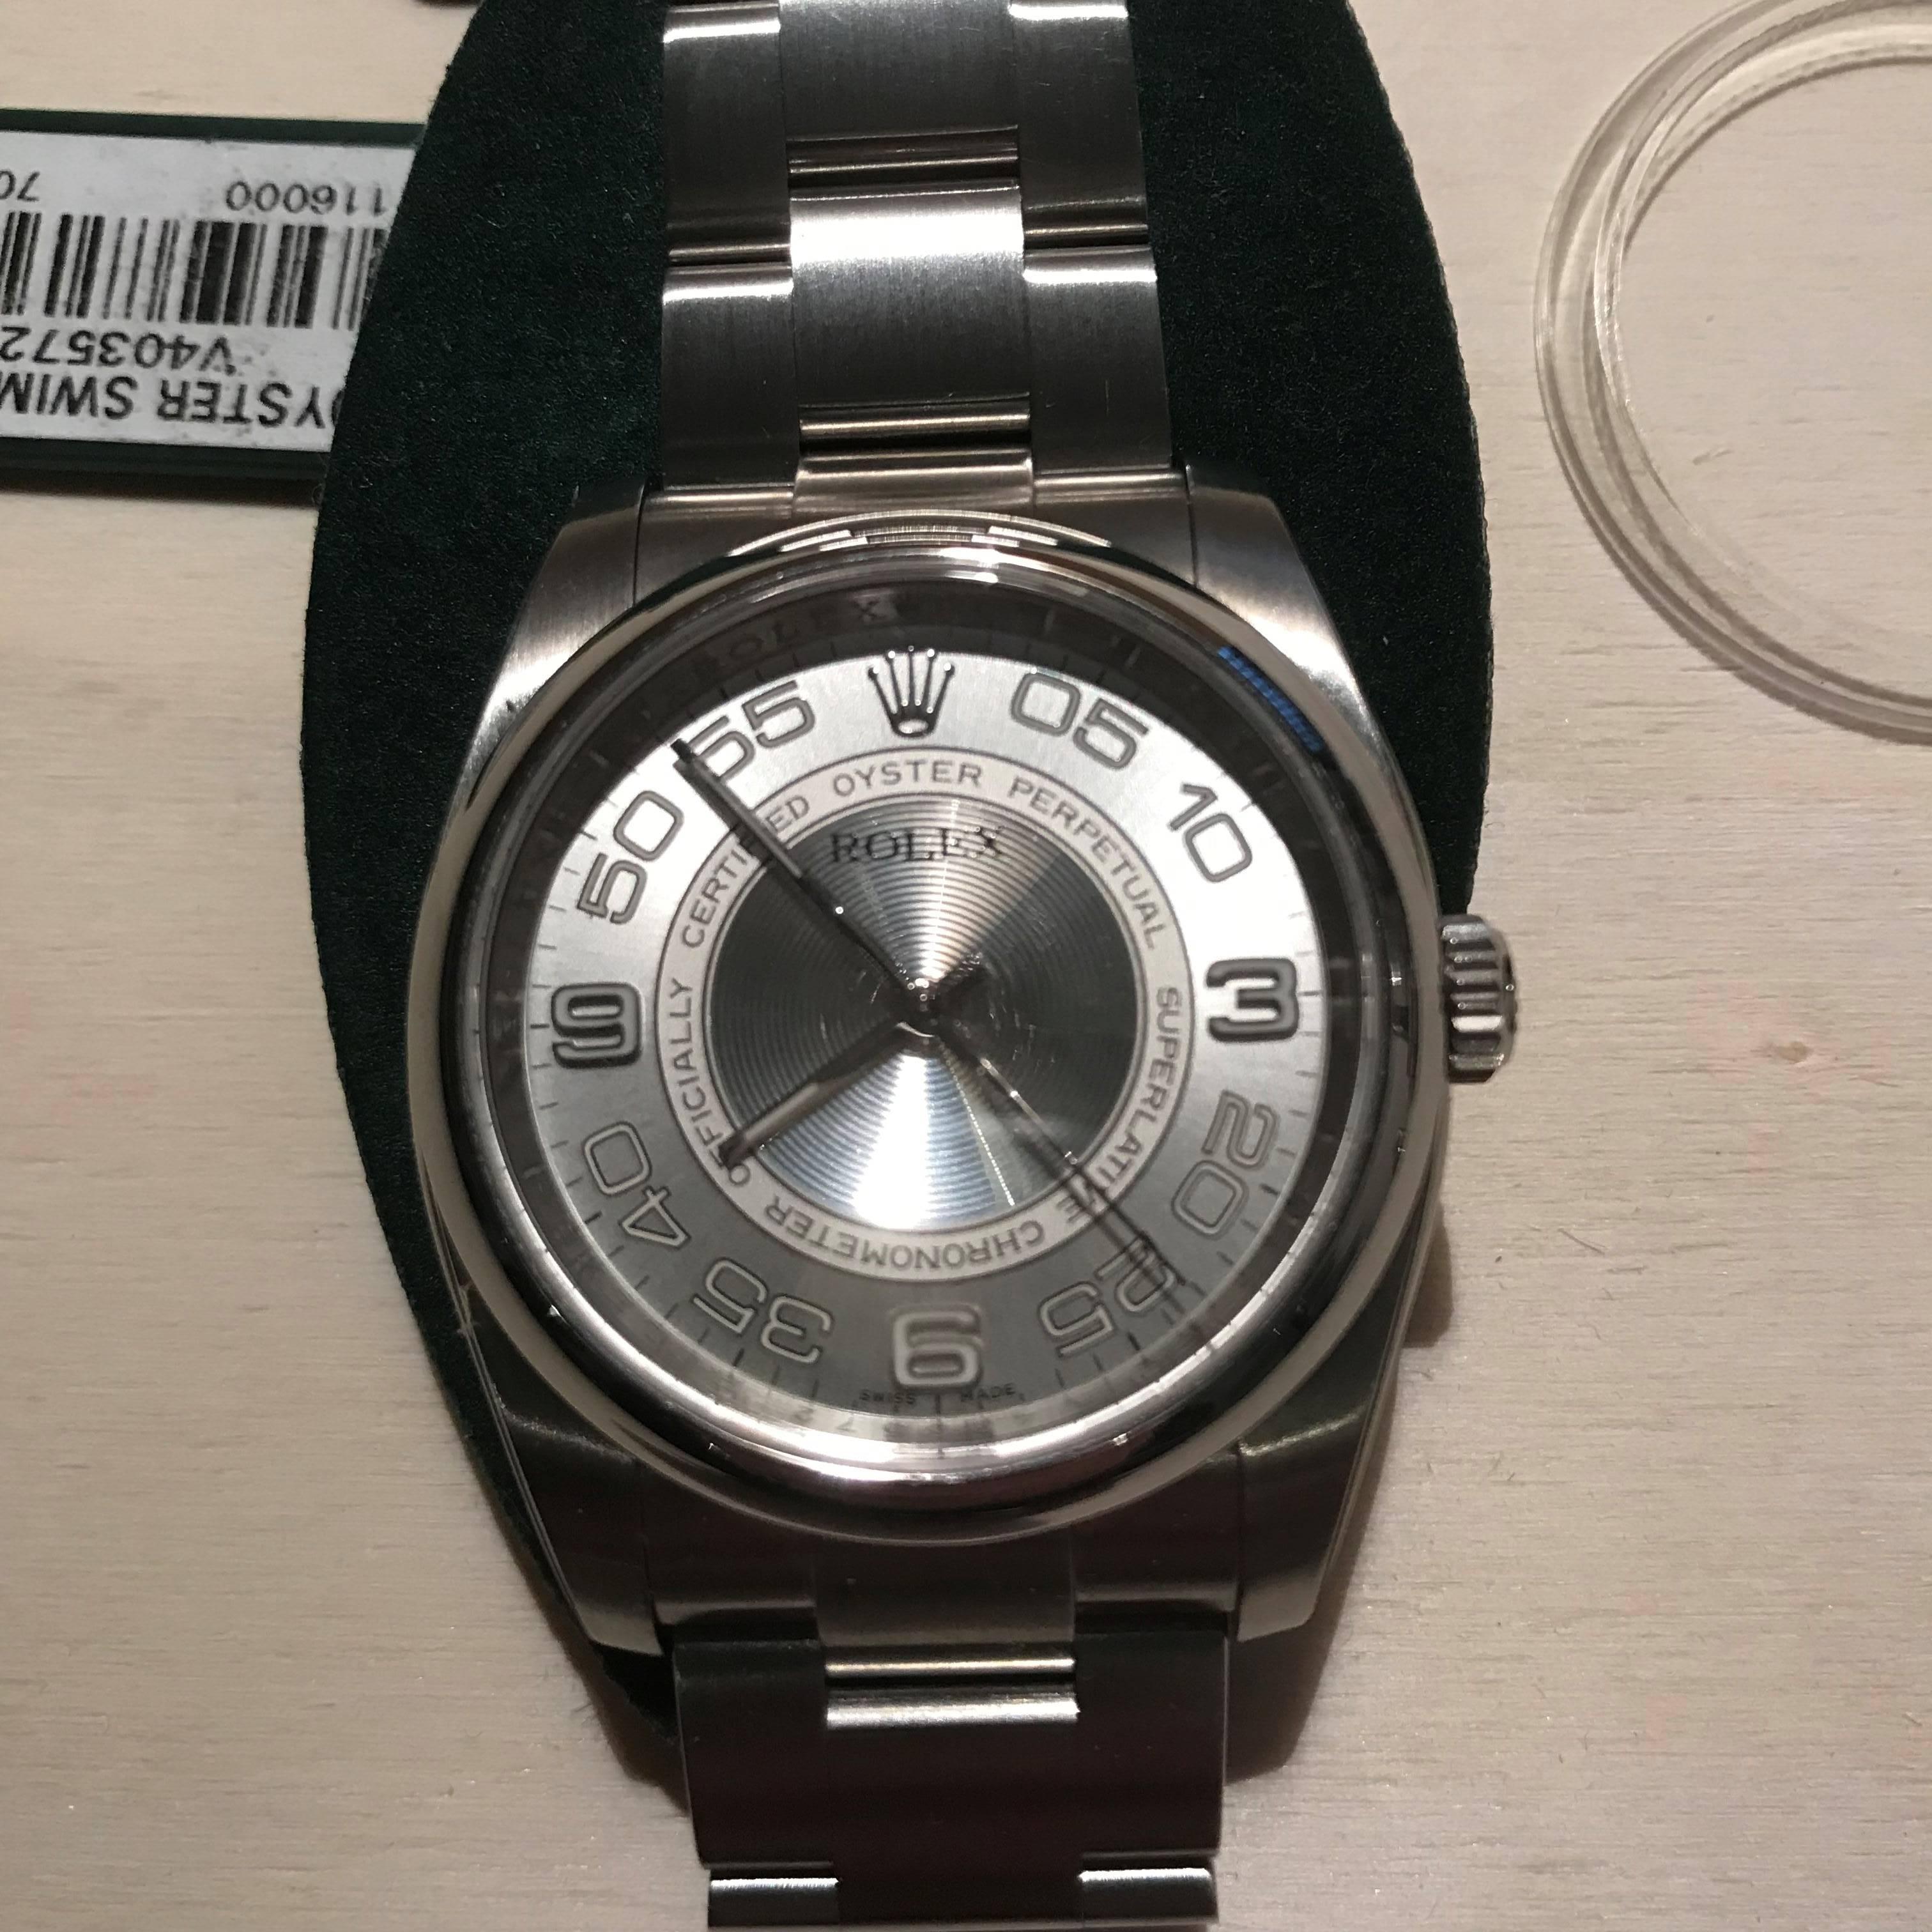 Very rare with this dial
A brand new perpetual Oyster Rolex Oyster 
Stainless steel/wrist strap oyster steel
Rare circular steel dial
Automatic
Certified chronometer
with its labels, and the protections on the steel
a future collector due to the